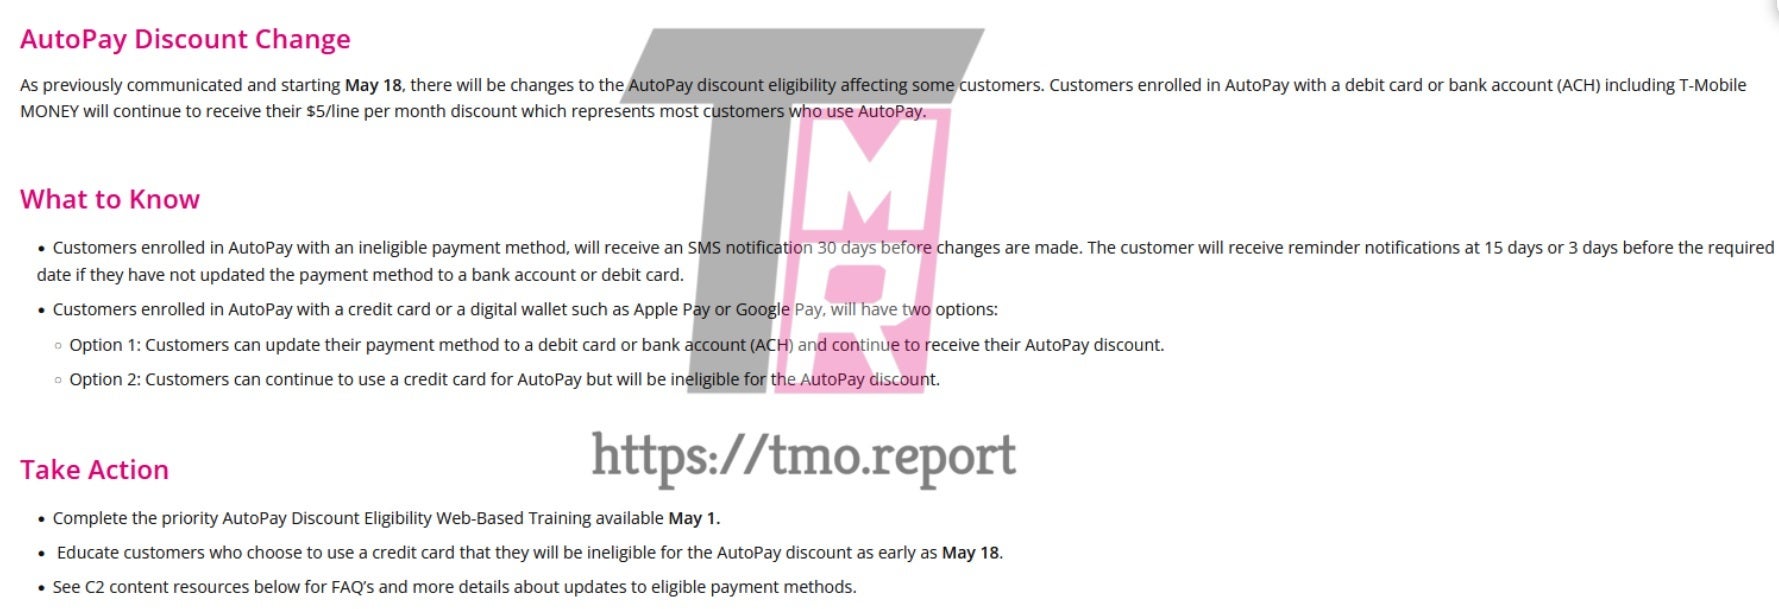 Leaked internal document discusses the changes to T-Mobile's autopay policies - T-Mobile will make an important change to its payment policies next week